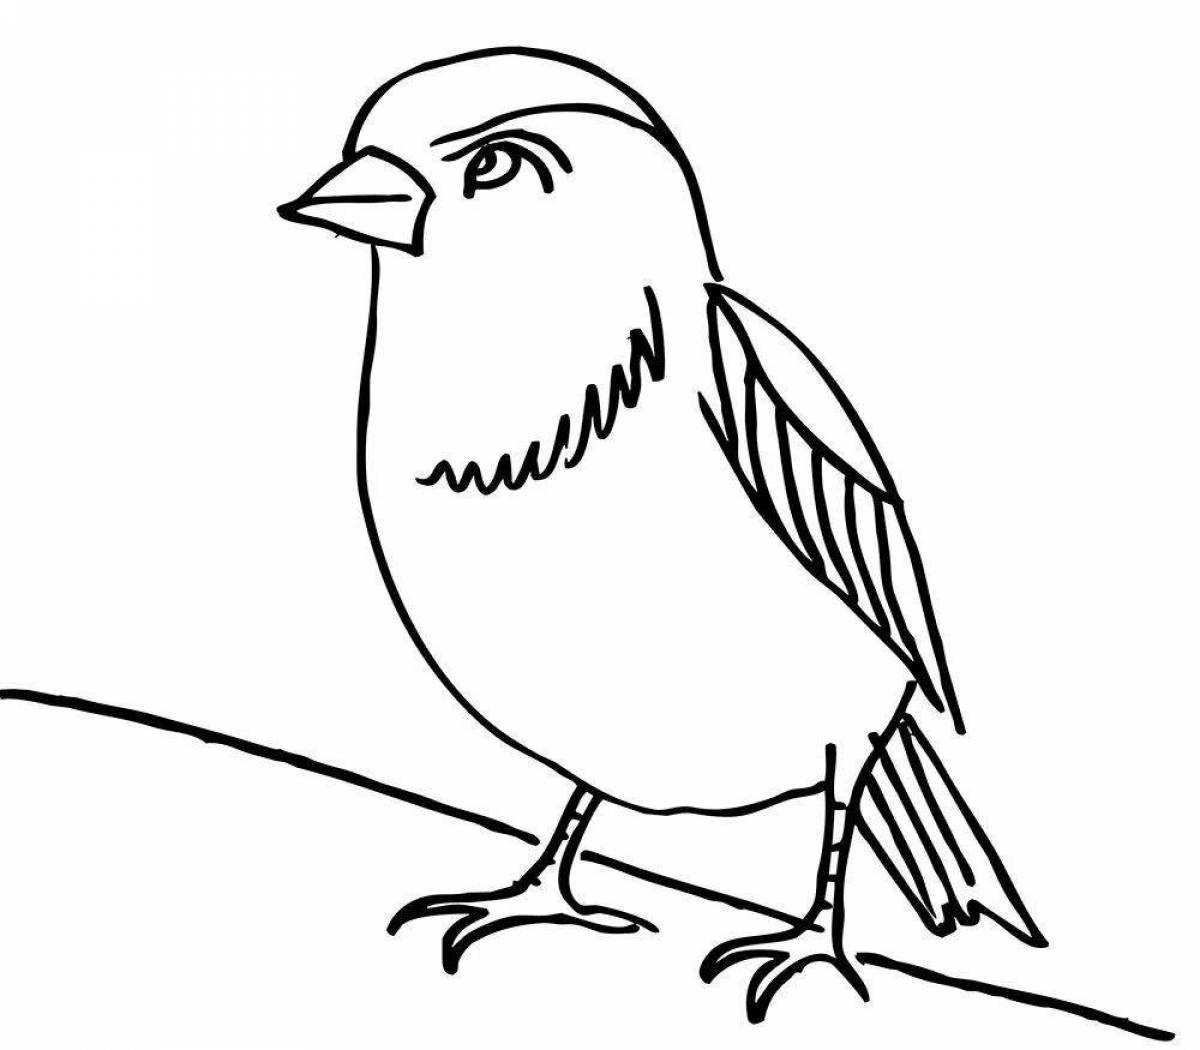 Brilliantly colored sparrow coloring book